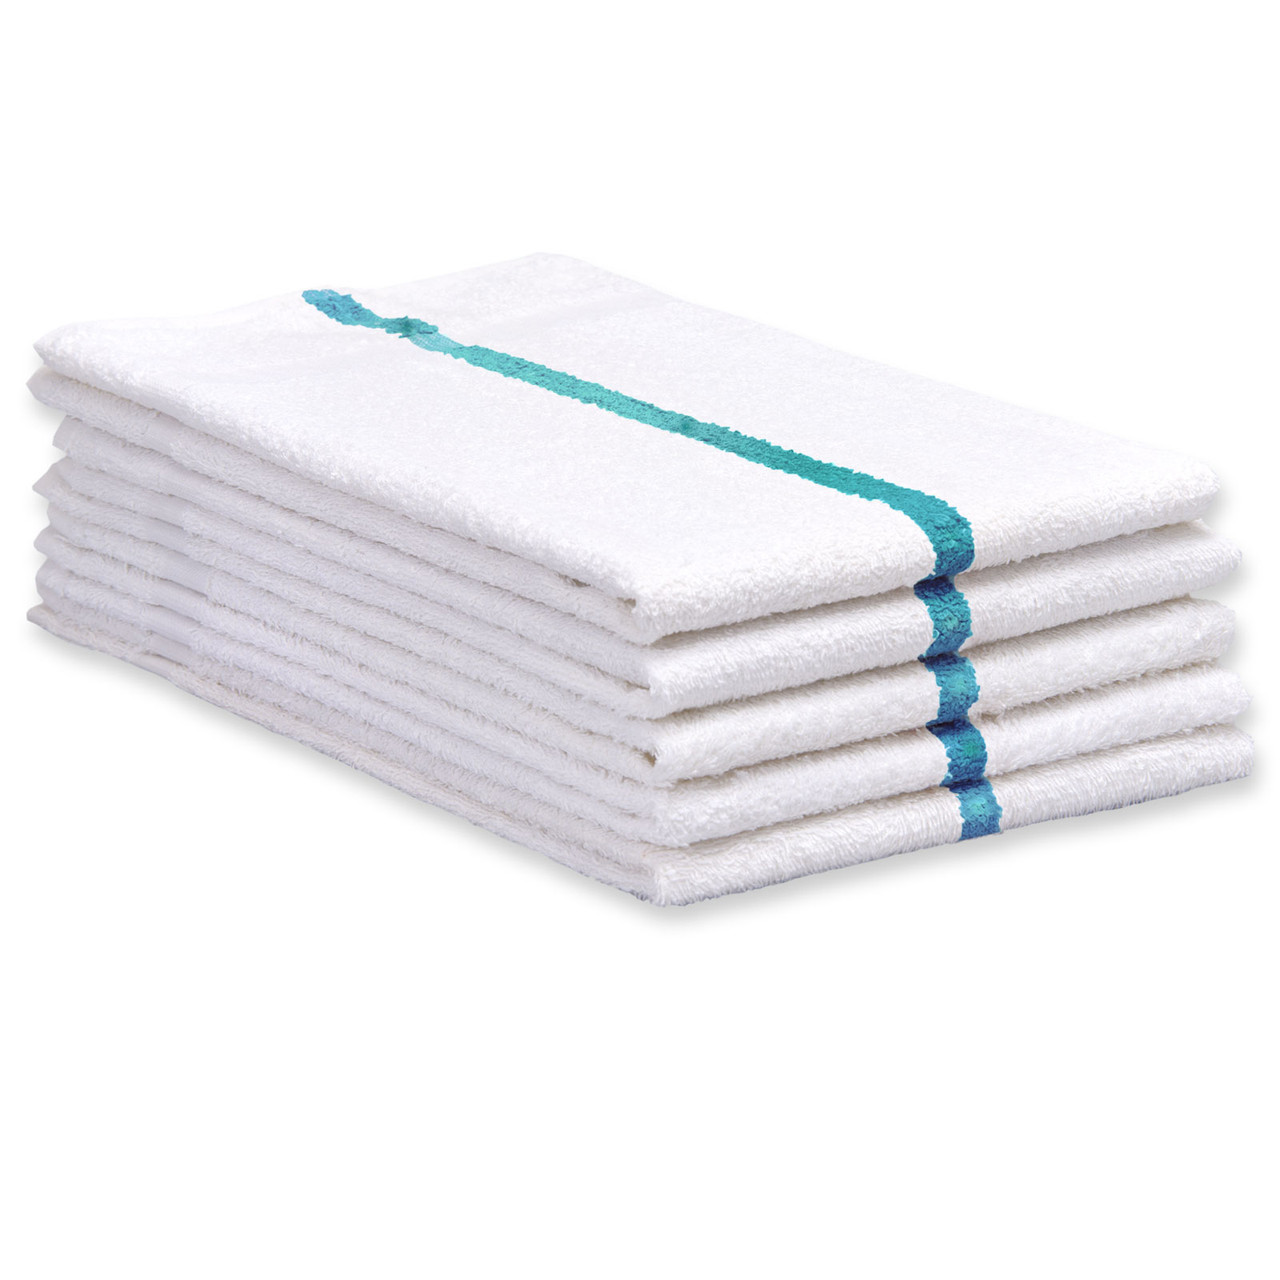 Wholesale Cotton Terry Towels 16x27 Medium Weight